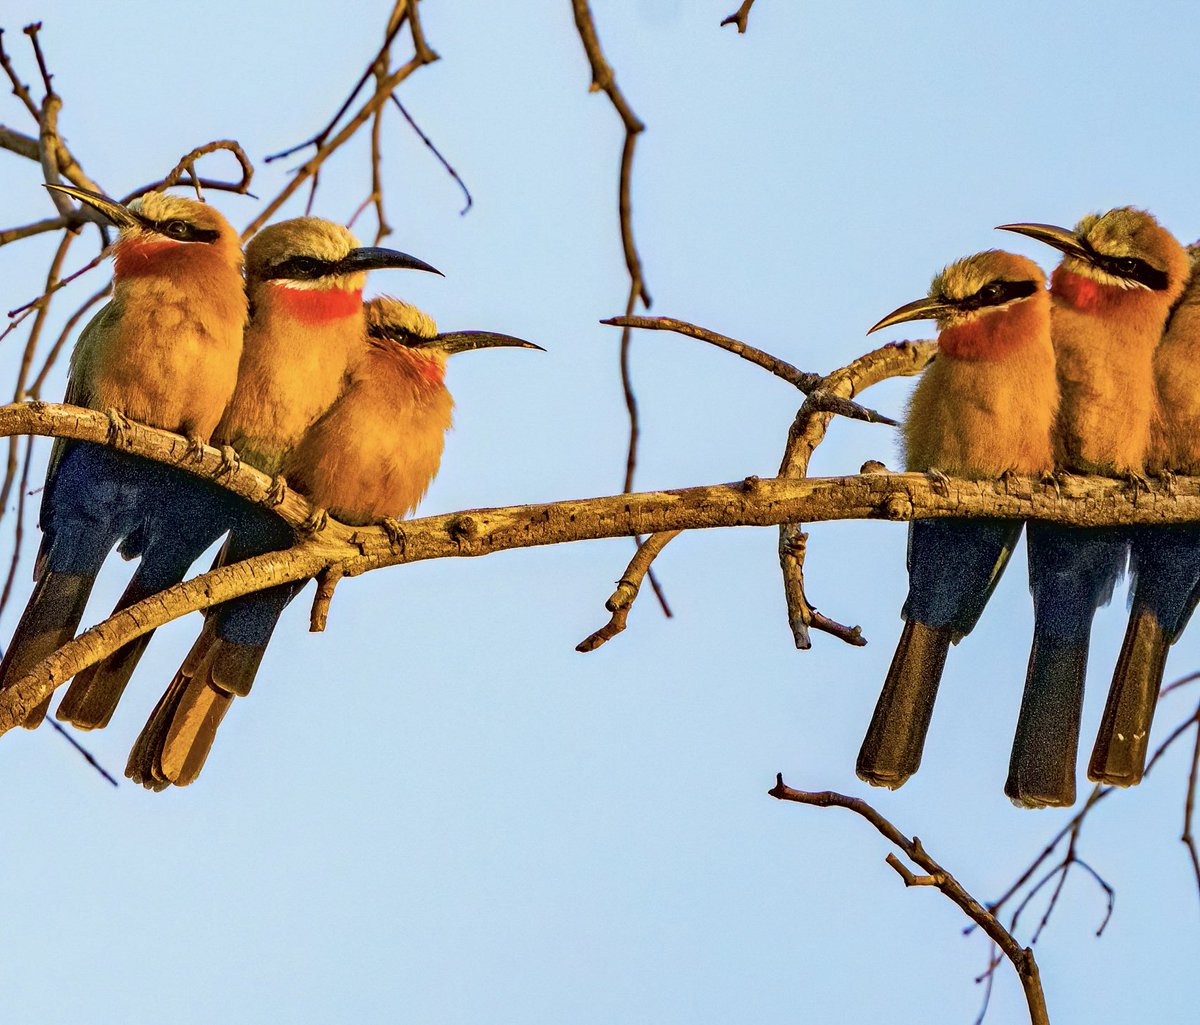 White-fronted Bee-eaters just waking up after a nights slumber @Natures_Voice @thetimes #BBCWildlifePOTD #TwitterNaturePhotography #birding #NaturePhotography #wildlifephotography #victoriafalls